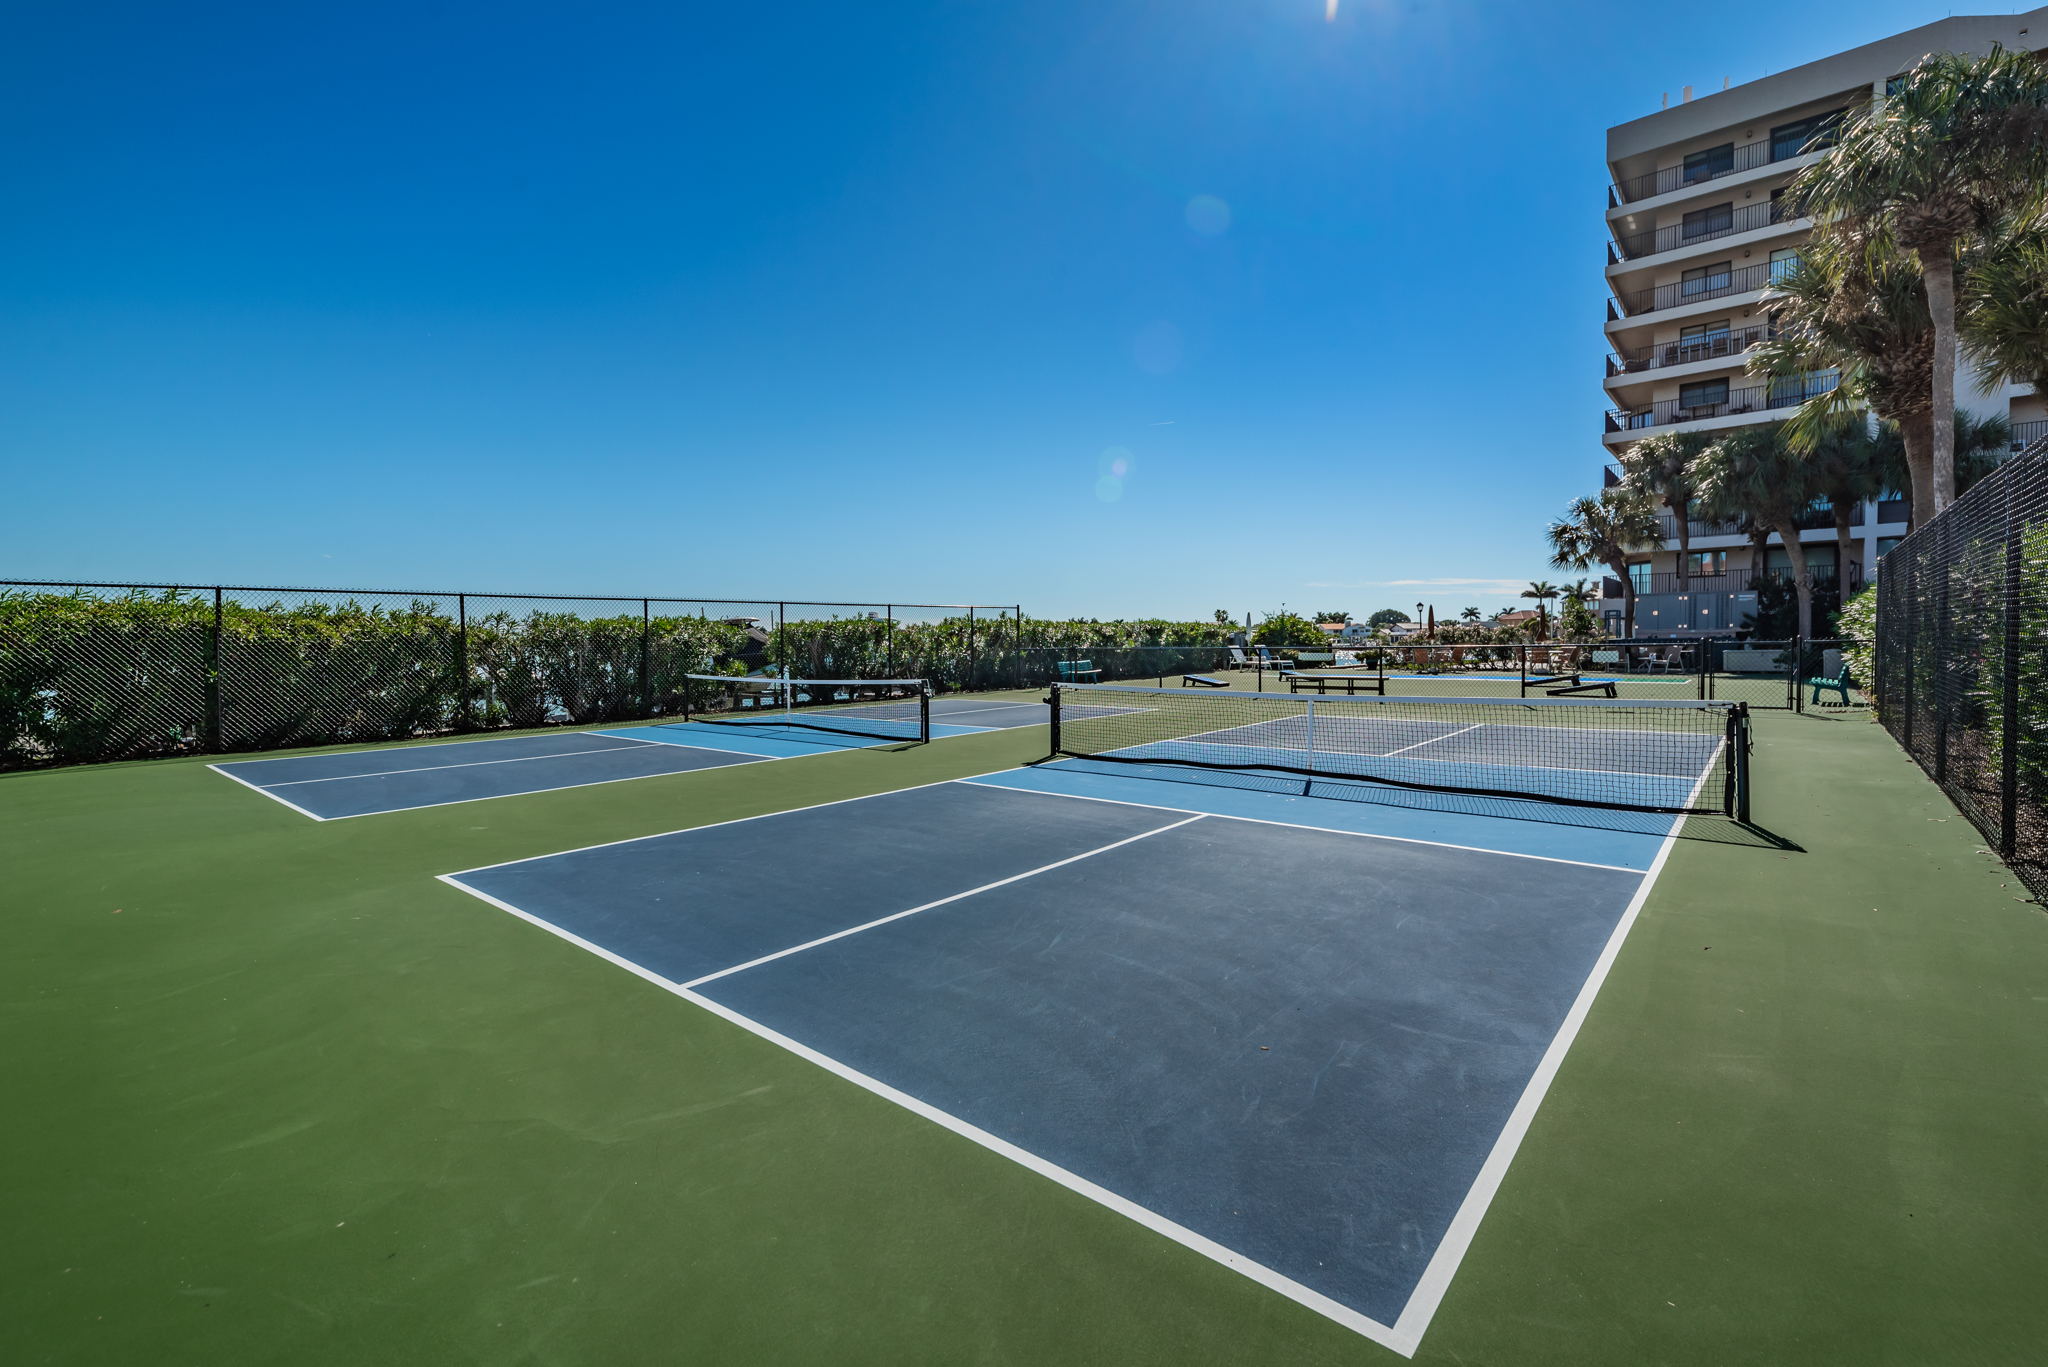 12a-Pickleball Courts